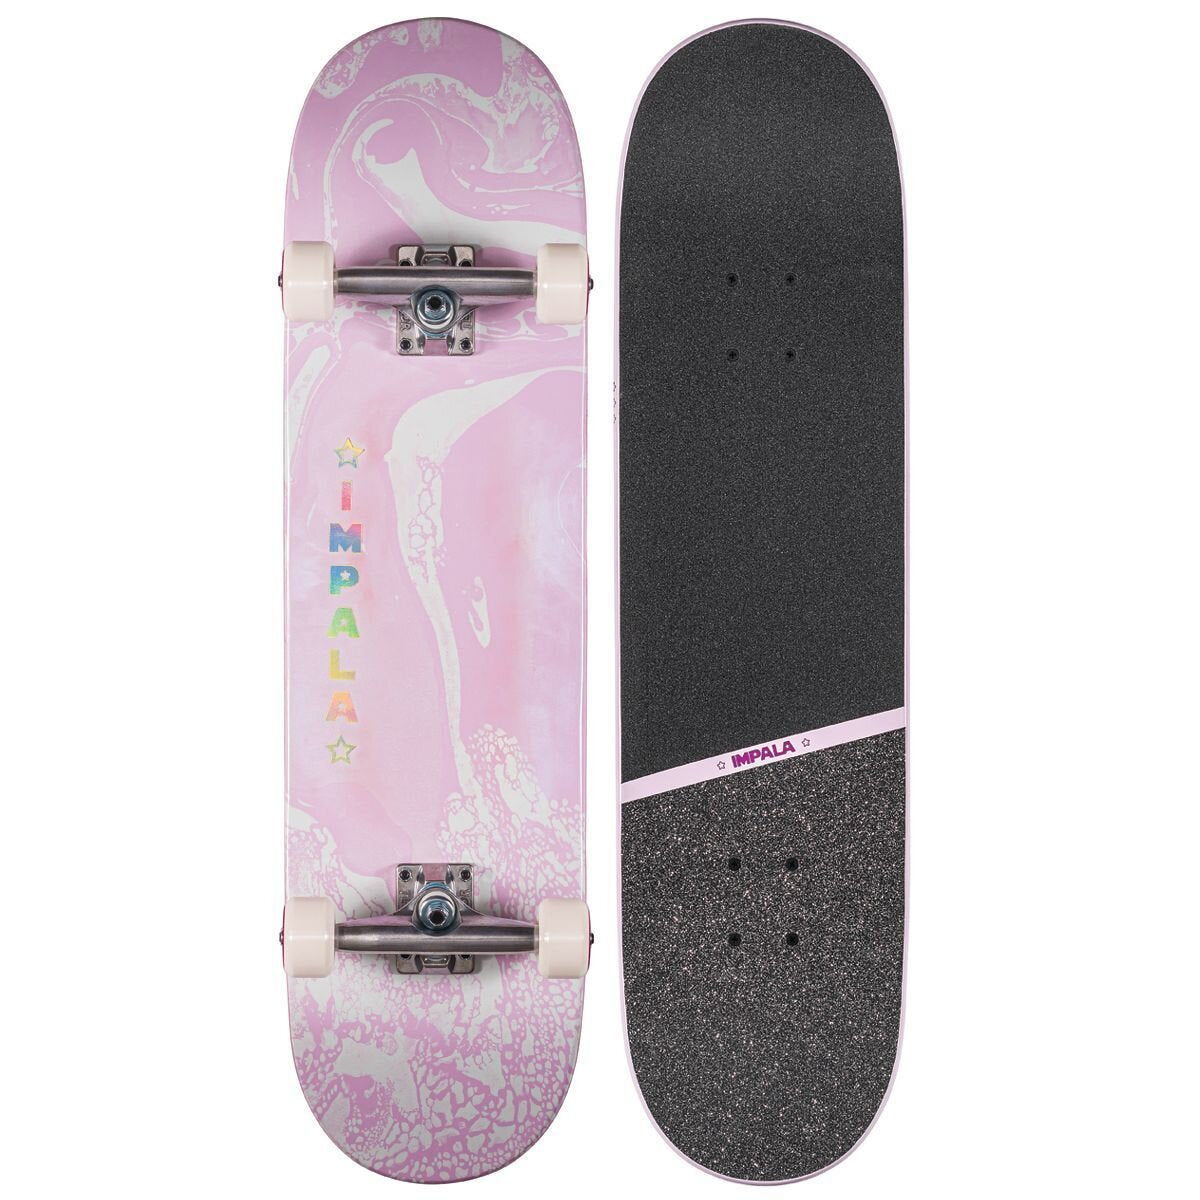 Impala Cosmos Skateboard Complete Pink 8.25"